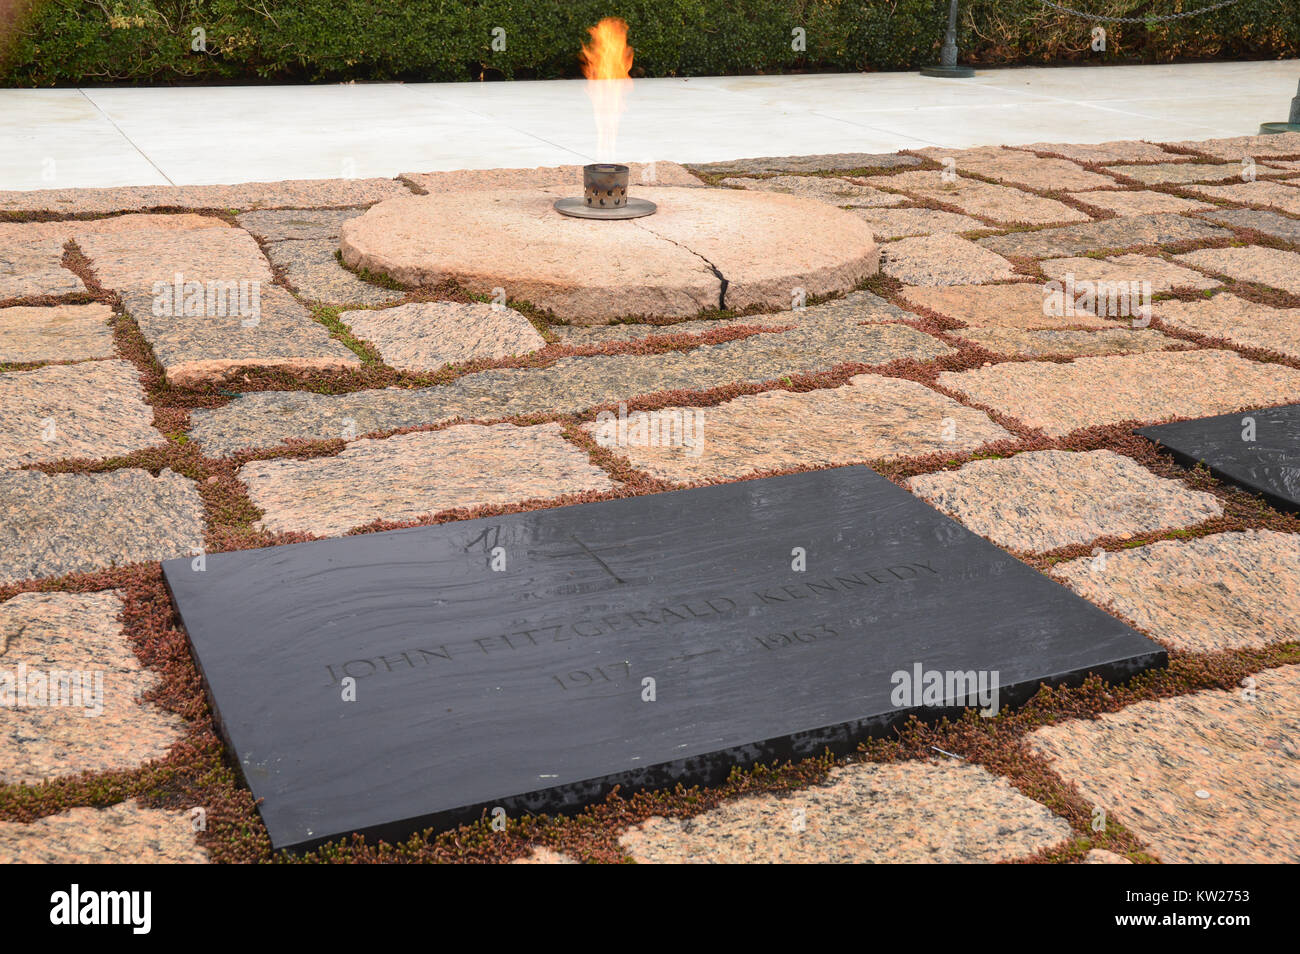 The Eternal Flame burns at the grave of President John F Kennedy in Arlington National Cemetery. Stock Photo